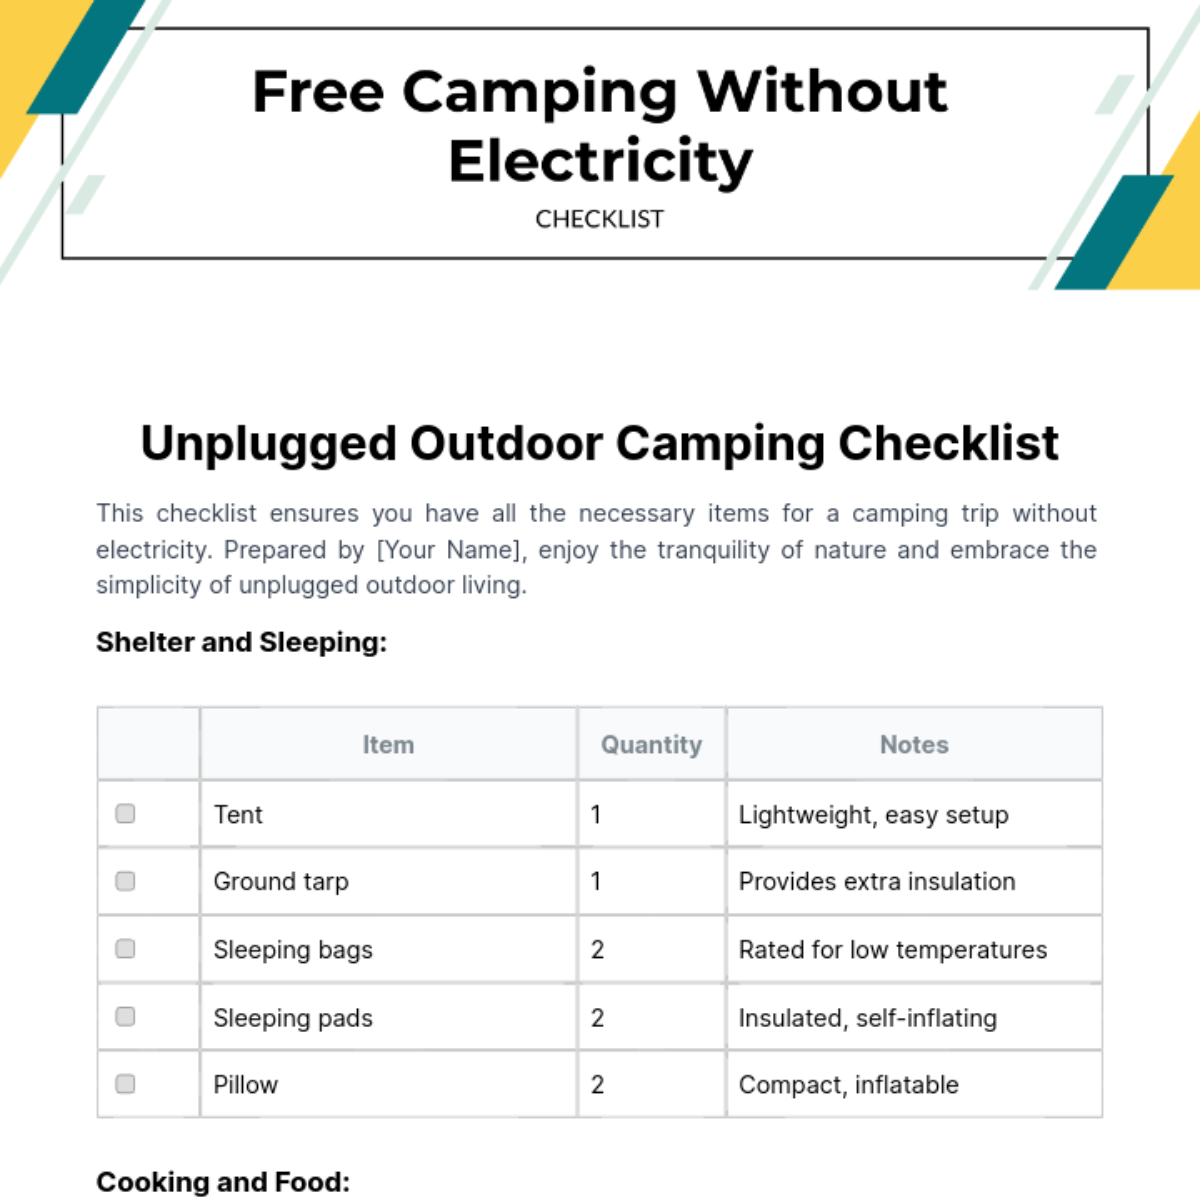 Camping Without Electricity Checklist Template